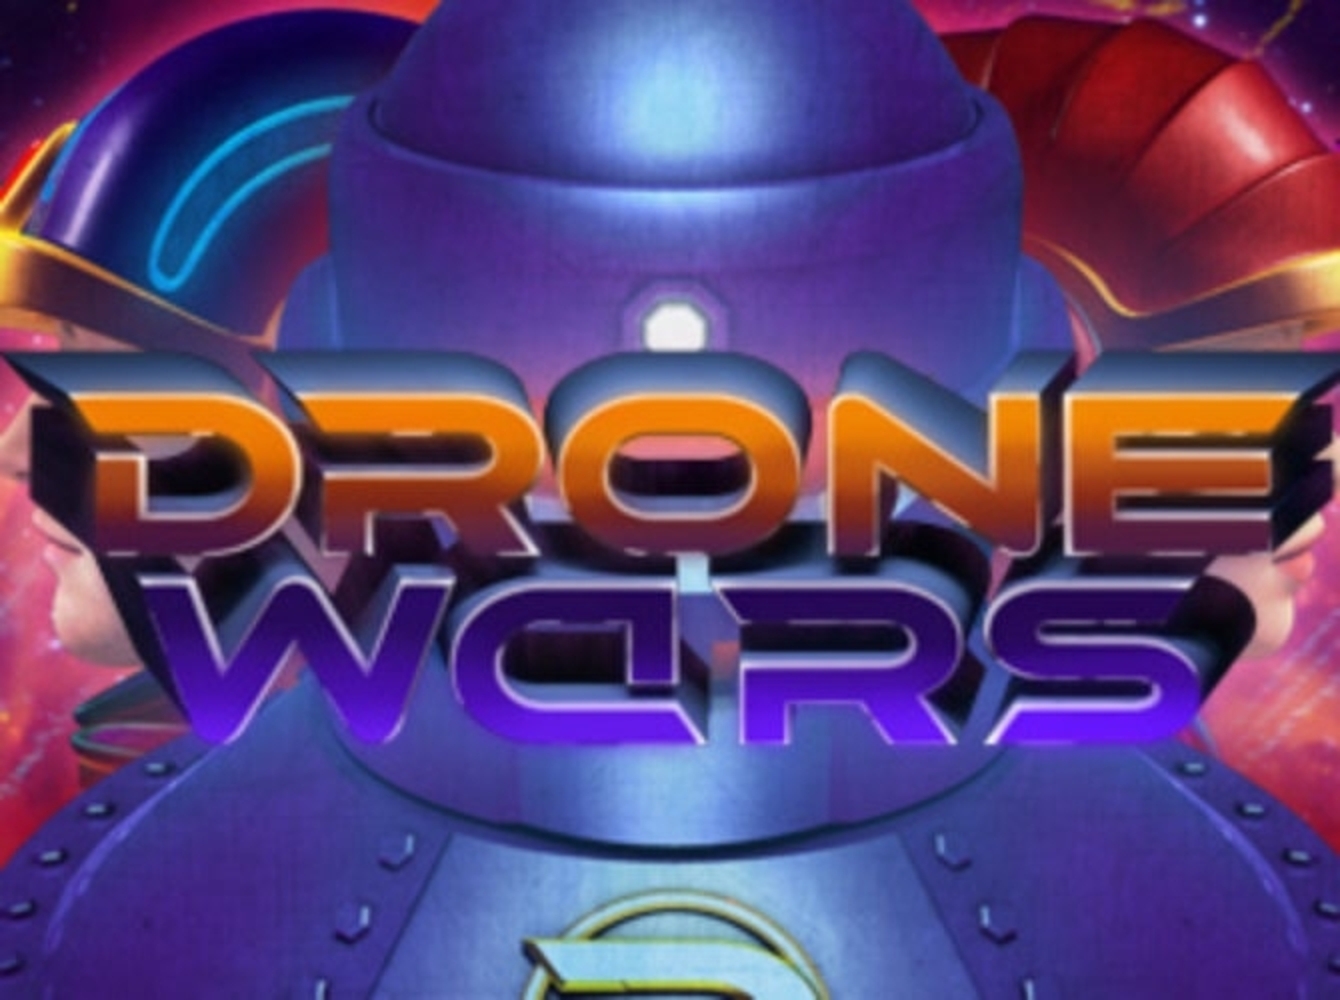 The Drone Wars Online Slot Demo Game by Microgaming